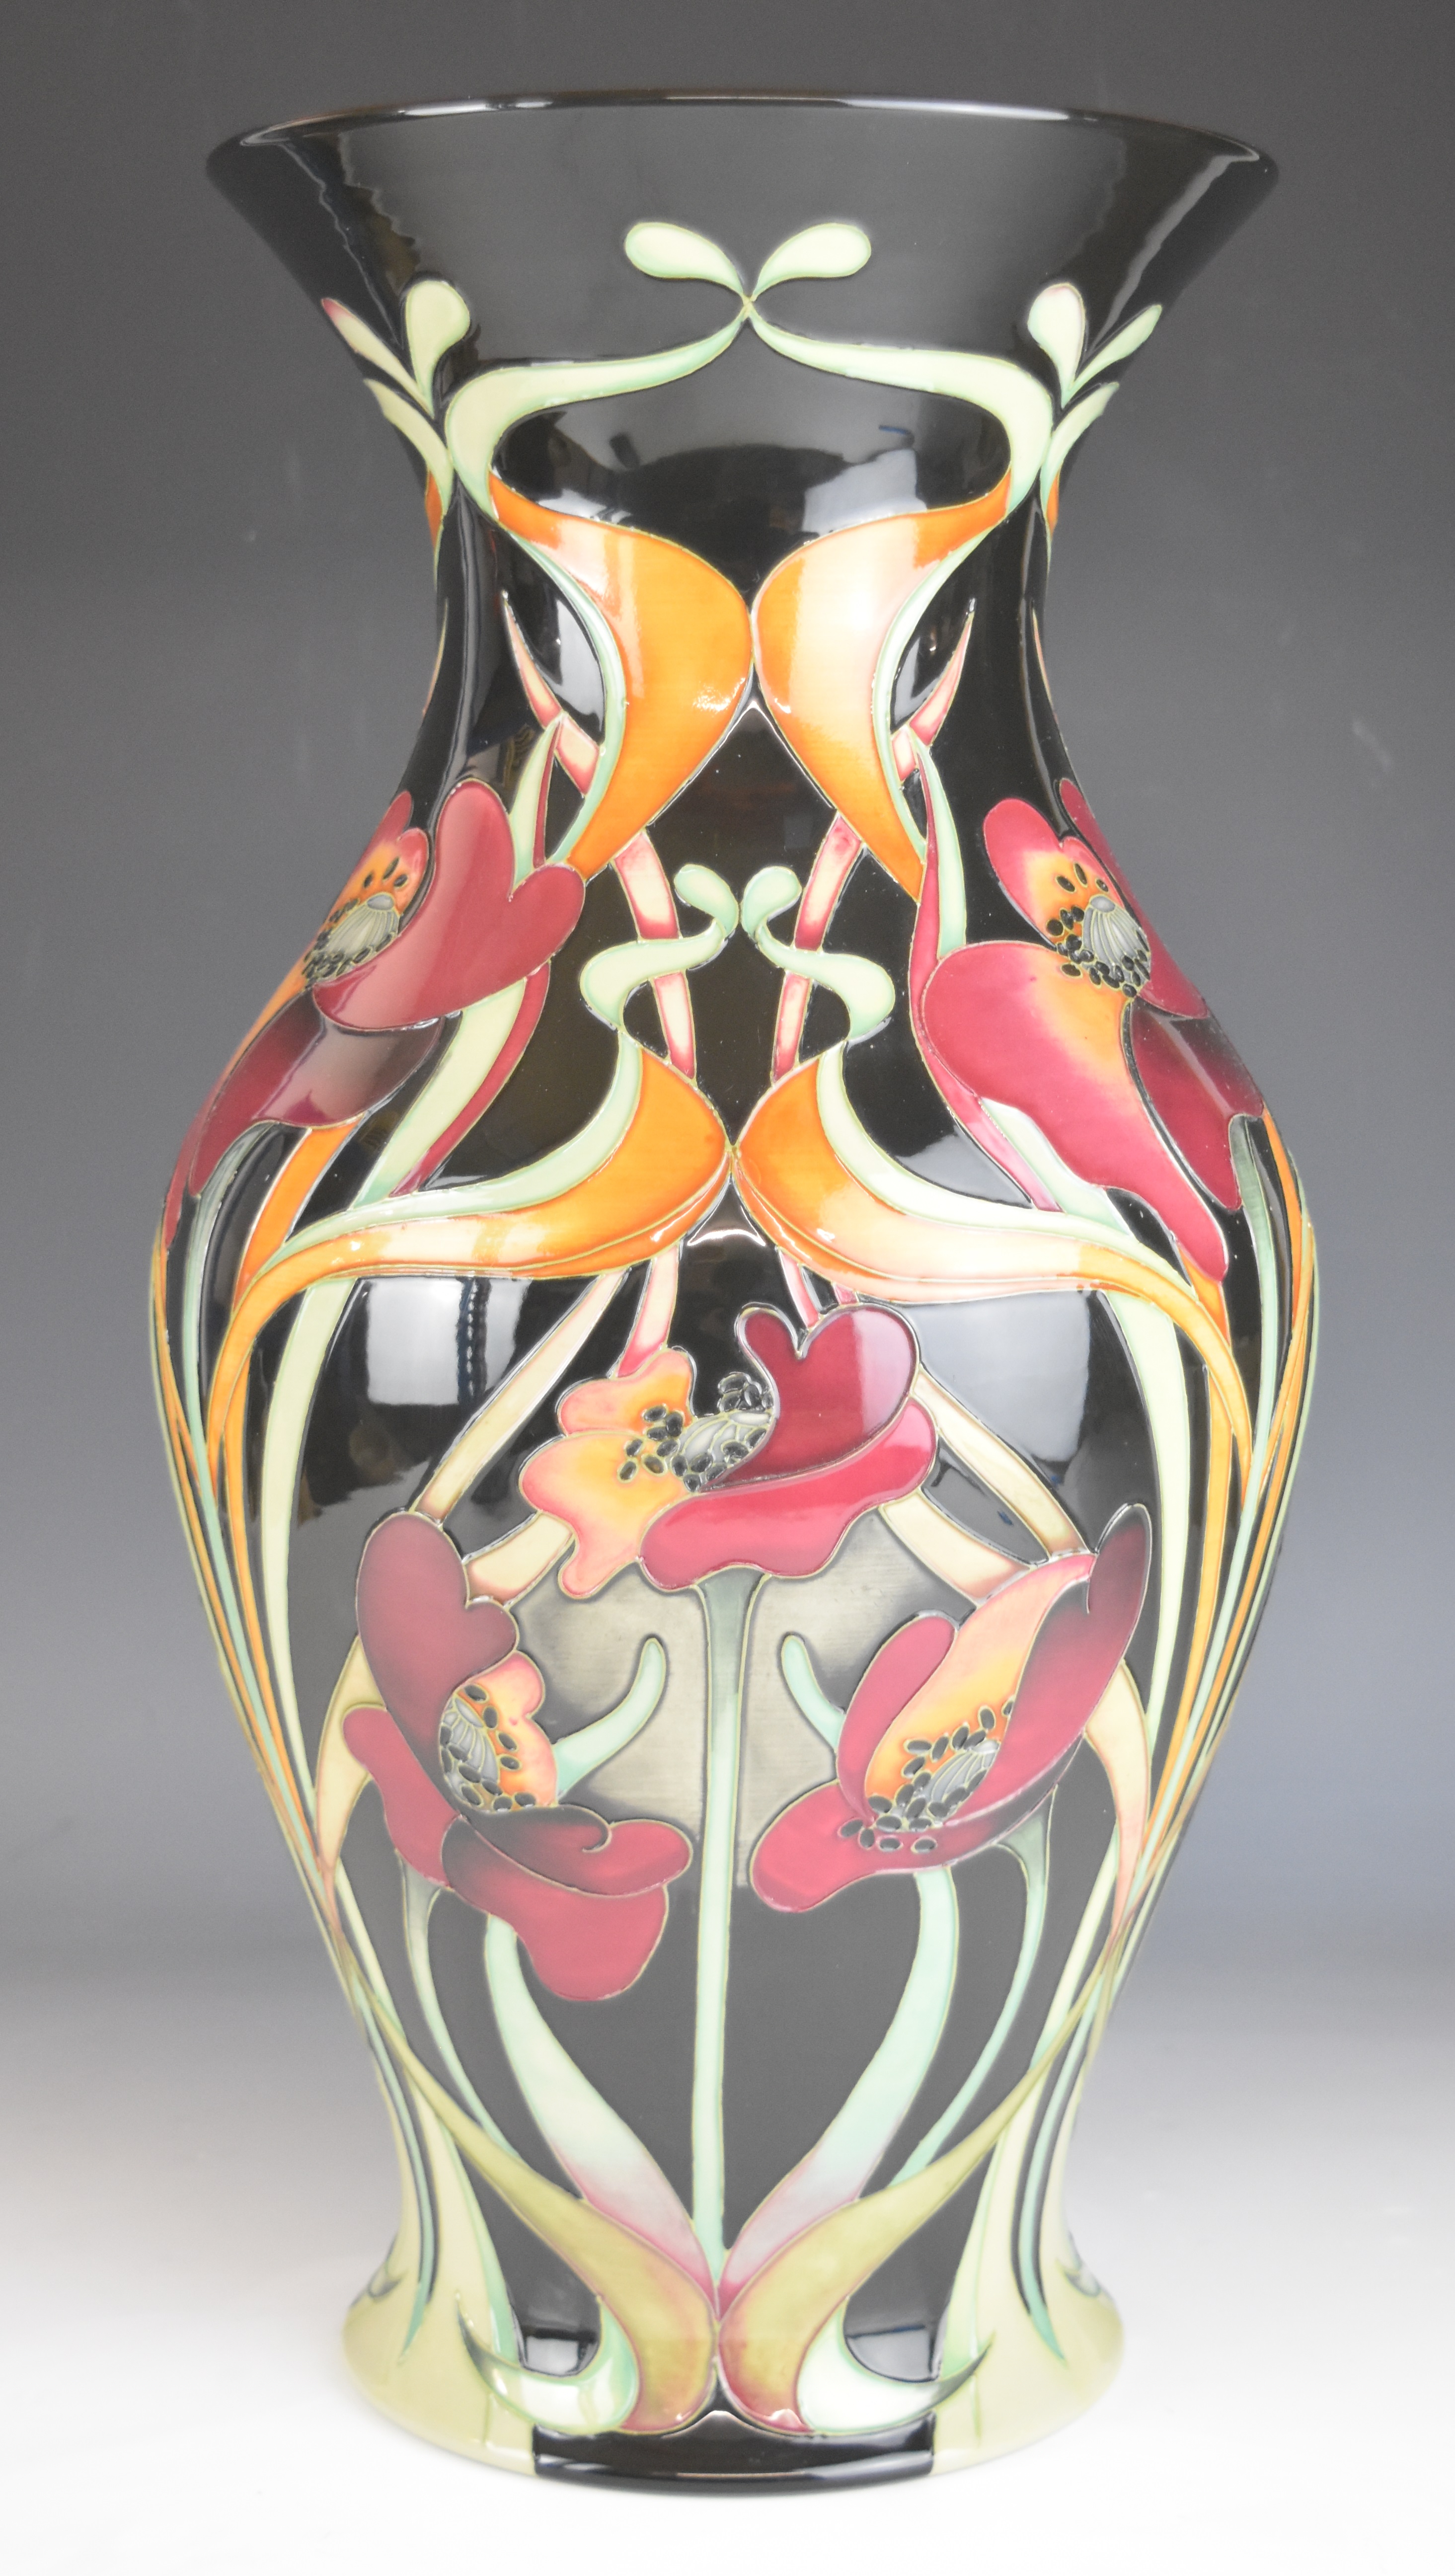 Moorcroft prestige vase 'In Praise of Poppies' with 'Trial 22-7-11' to base and label stating - Image 7 of 12